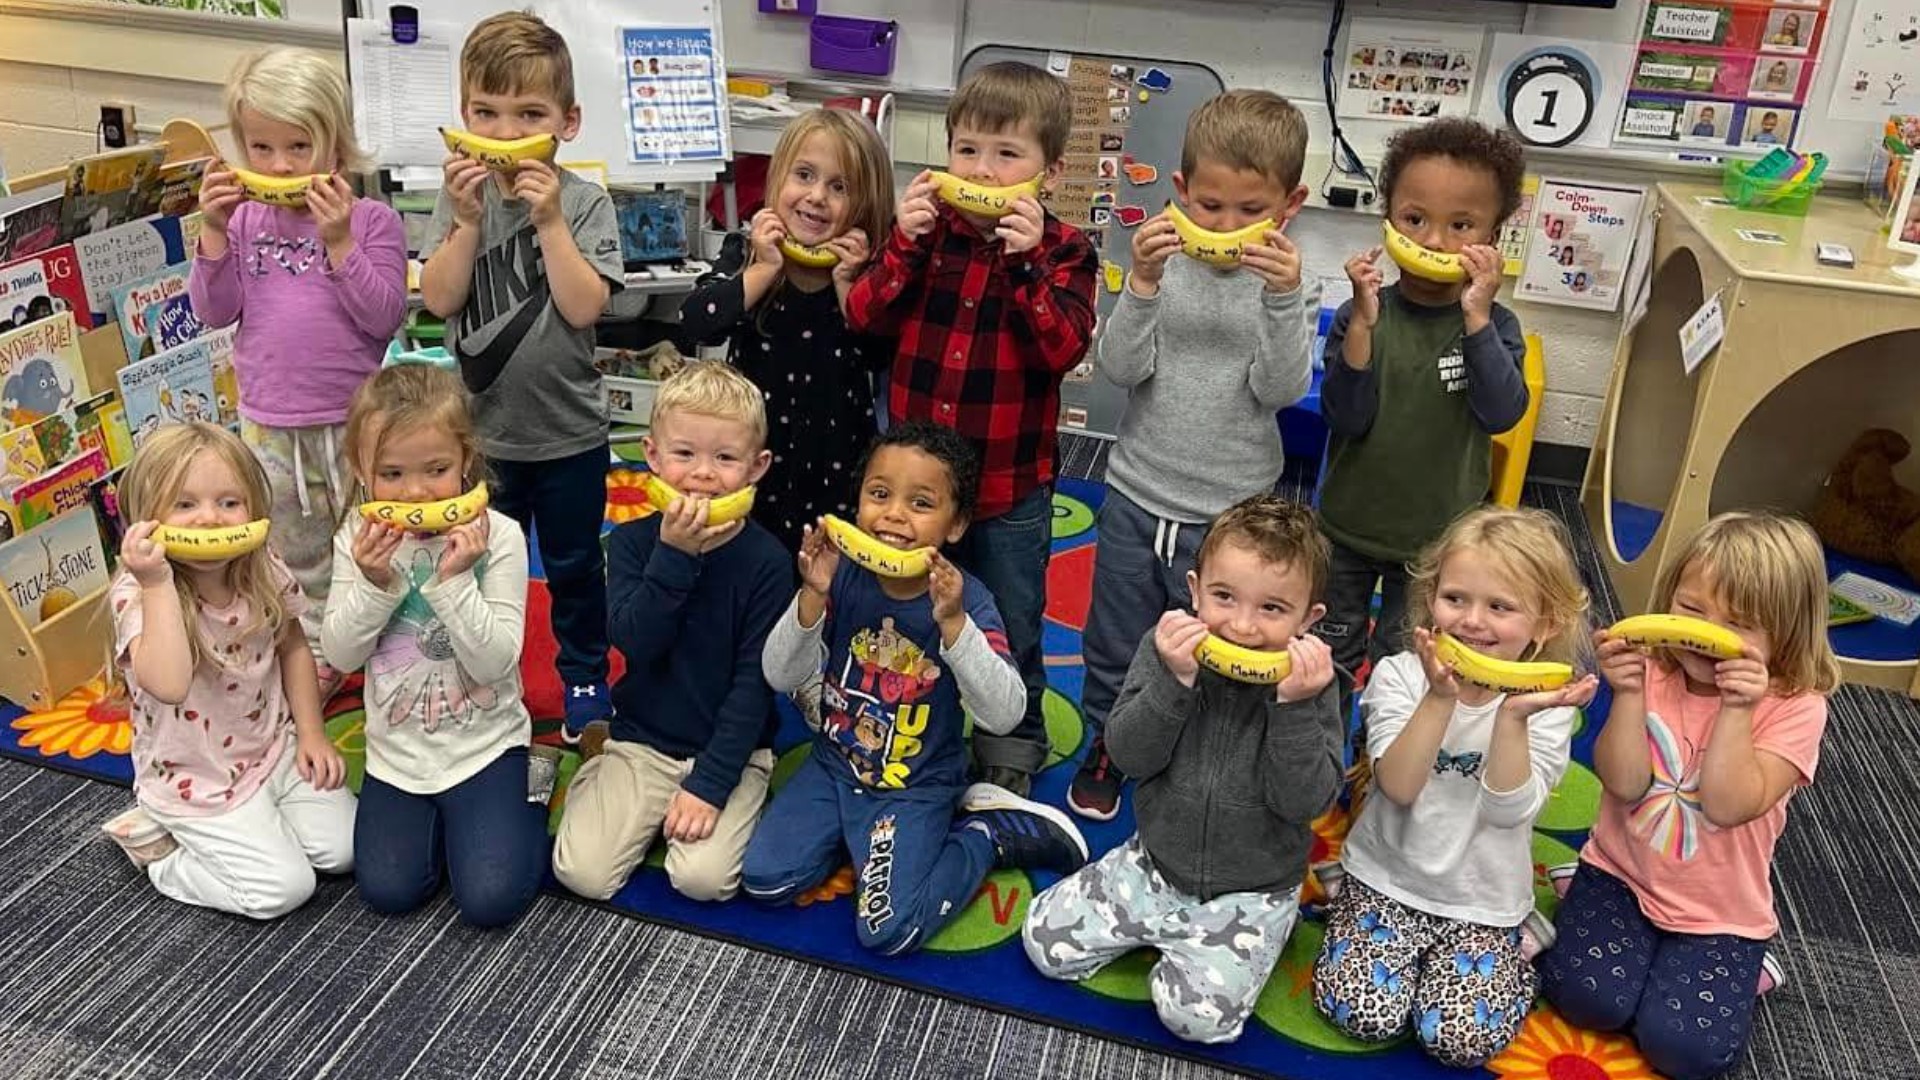 Staff members at Baldwin Heights Elementary School came up with a sweet idea to bring smiles to the faces of their students.